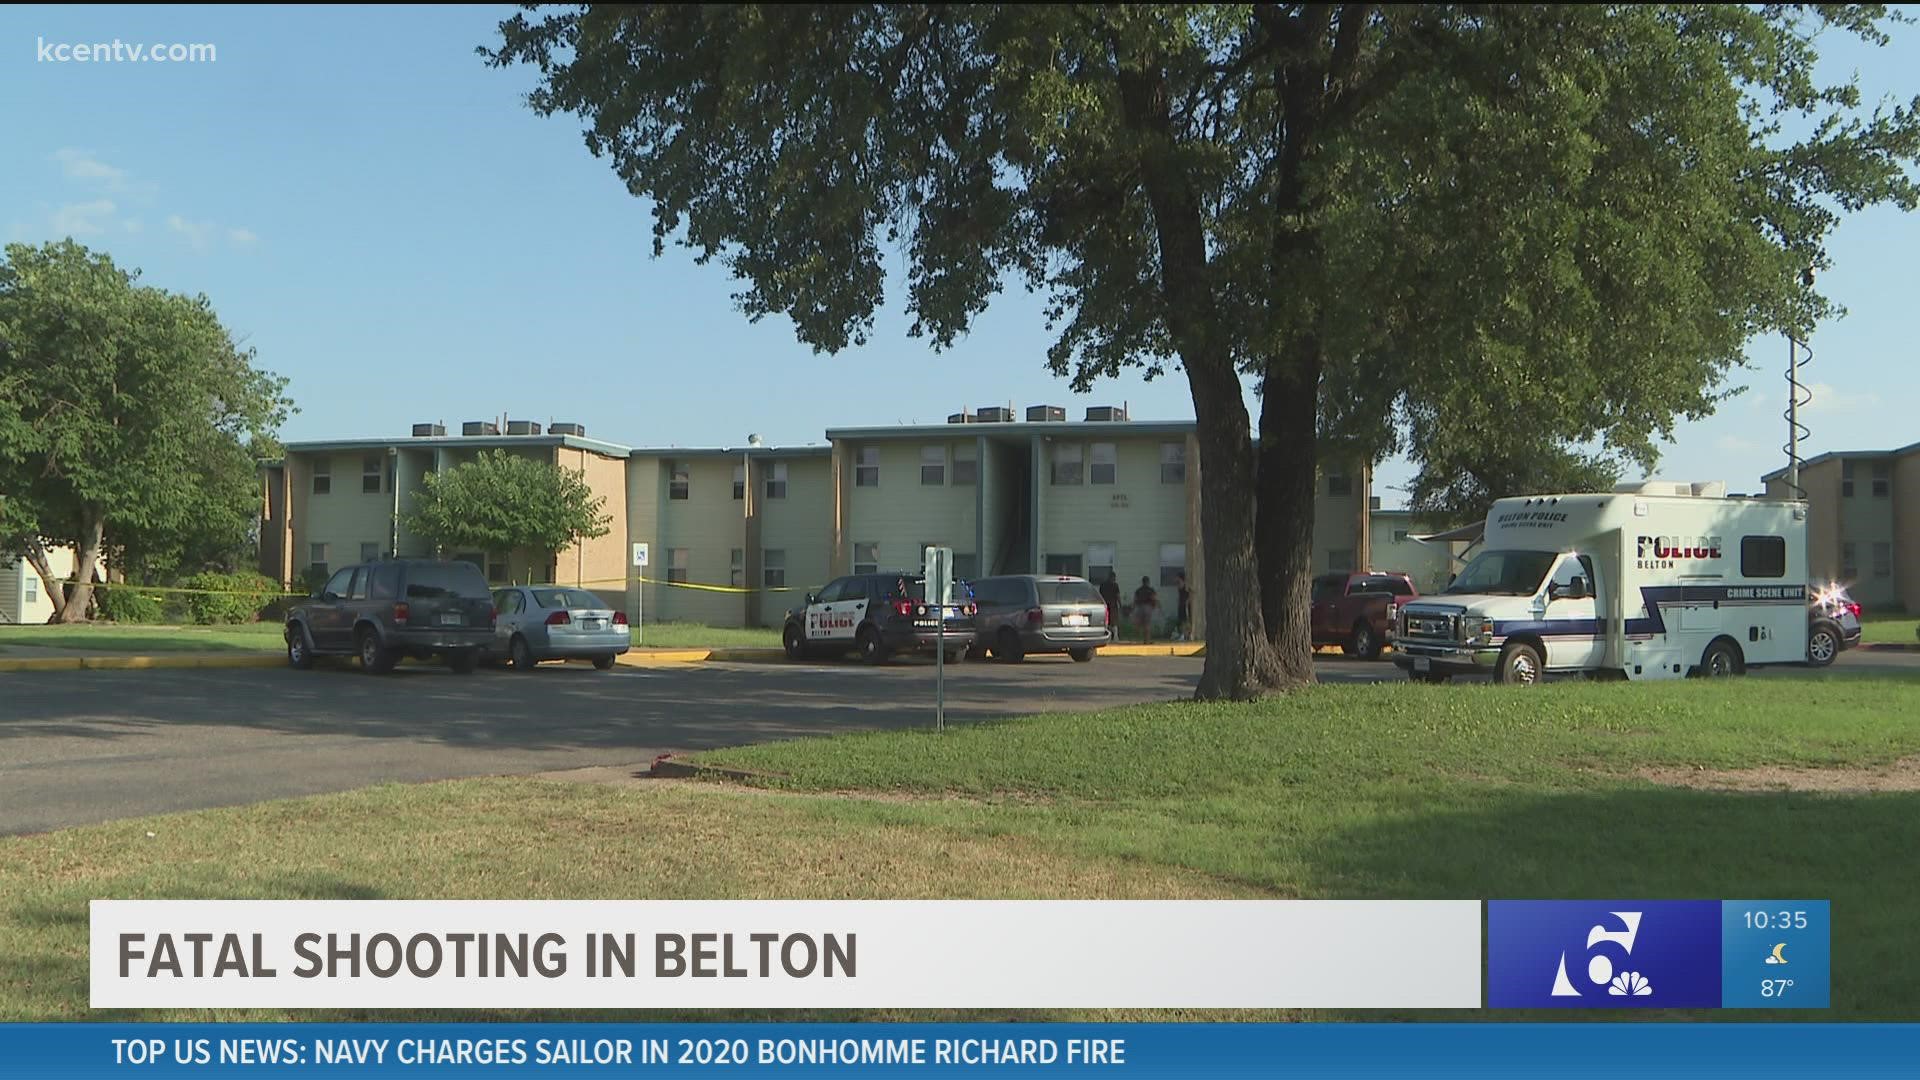 Police are looking for a suspect connected to a murder in Belton earlier today.